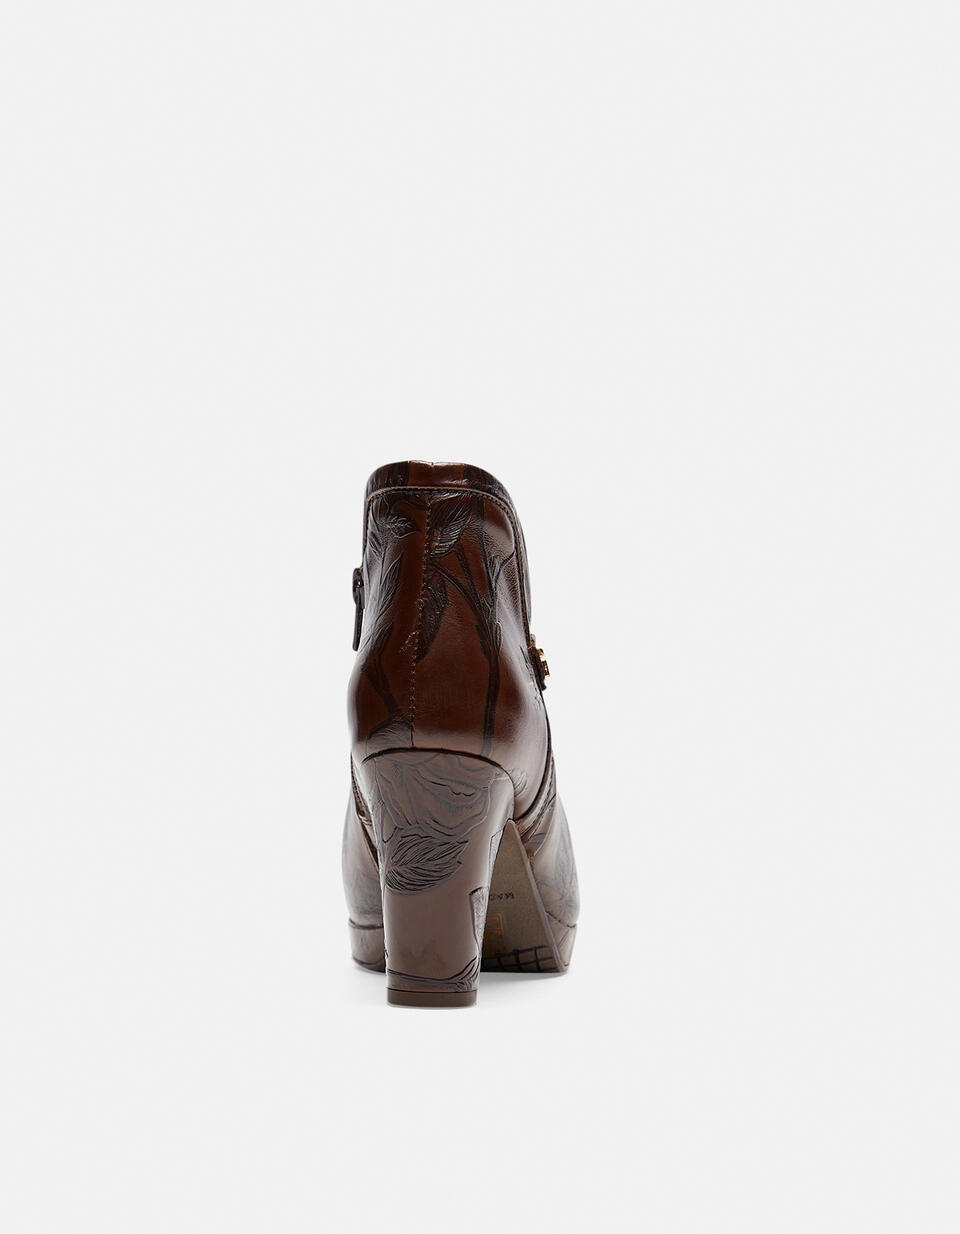 ANKLE HIGH Mahogany  - Woman Shoes - Shoes - Cuoieria Fiorentina